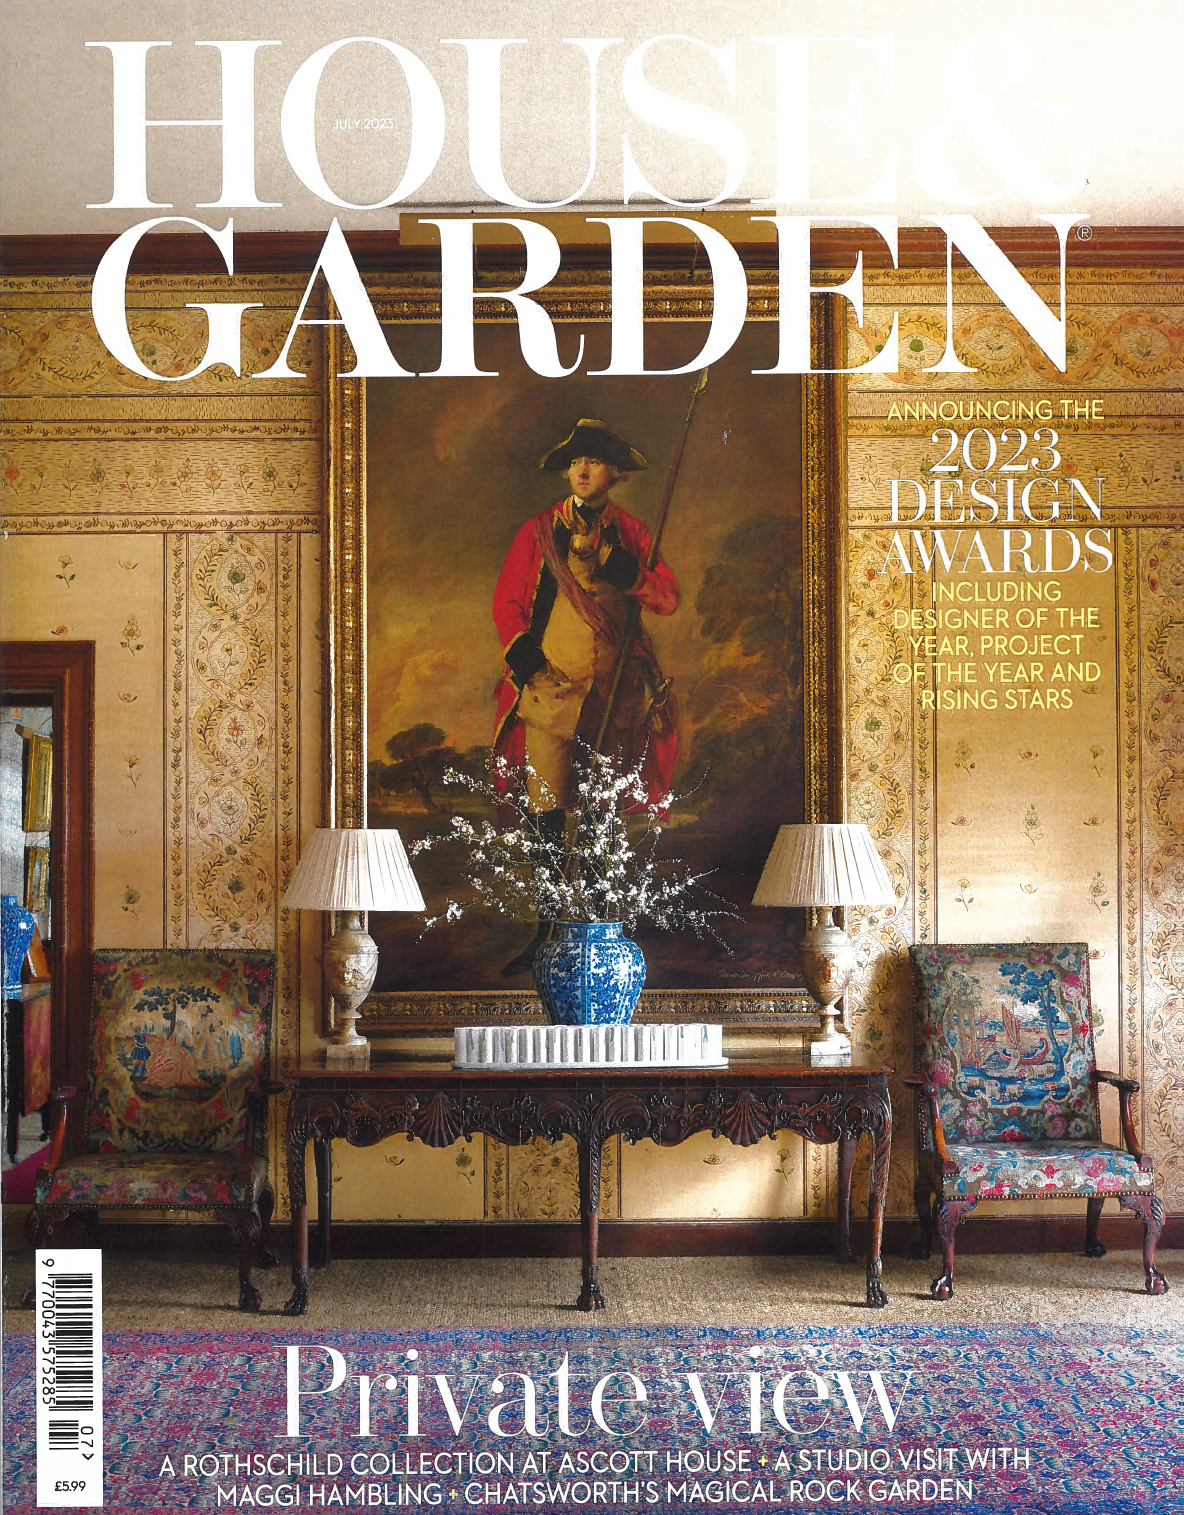 cover of house and garden magazine featuring the Rothschild living room and jewelry from the wandering jewel